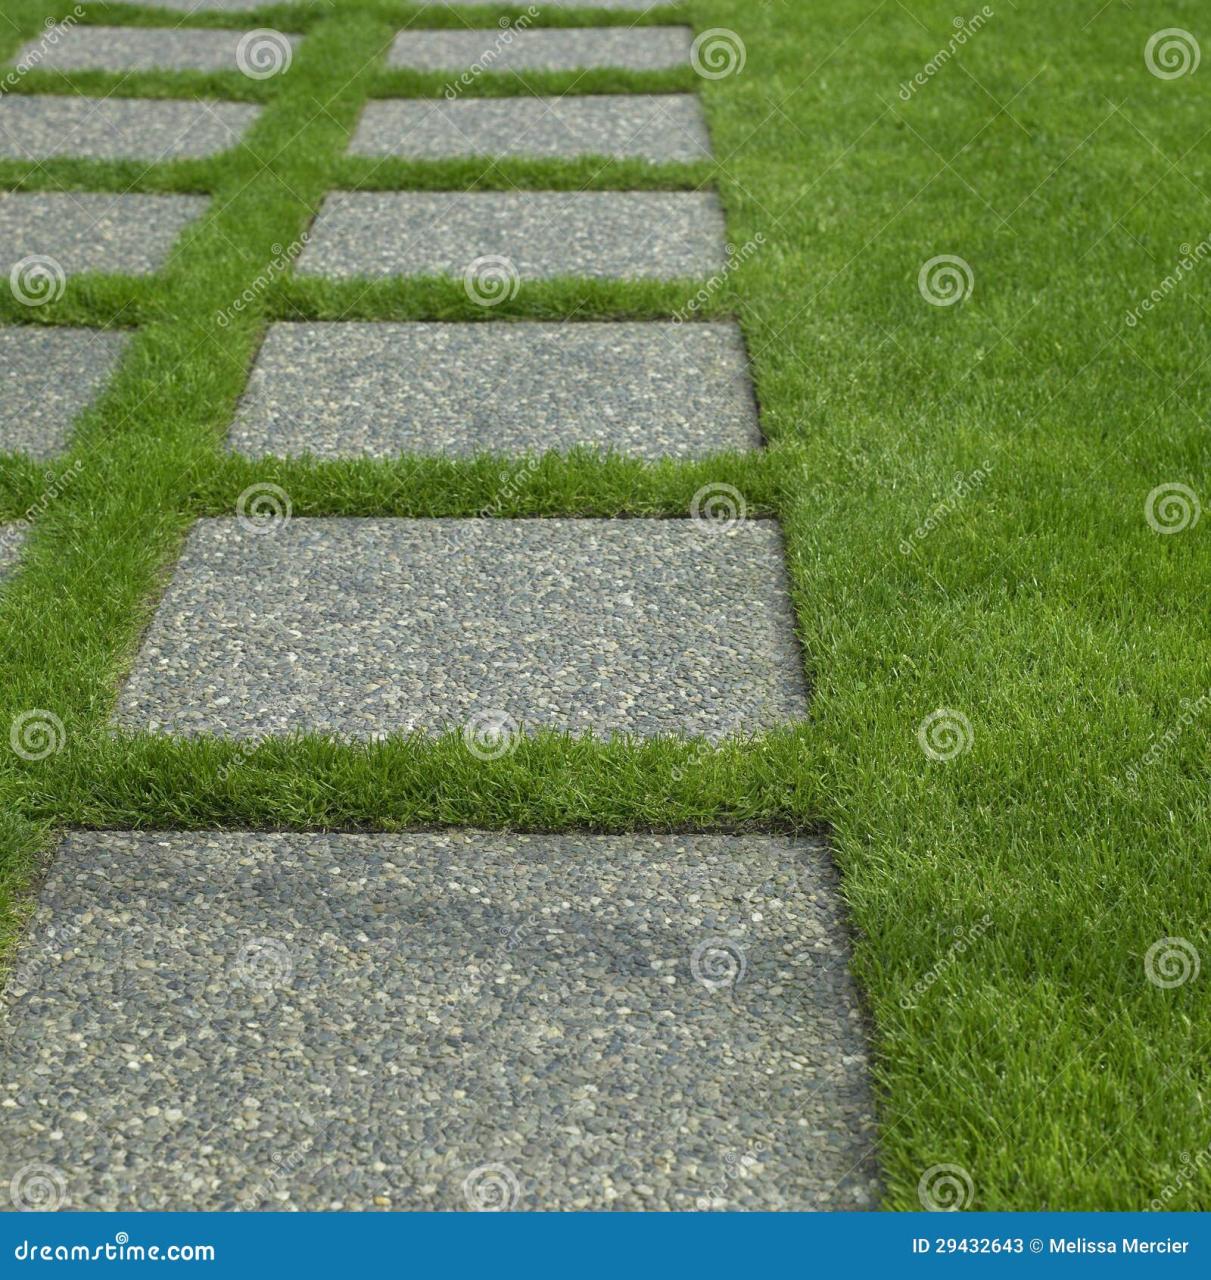 Manicured grass stock image. Image of angle, metro, growth - 29432643